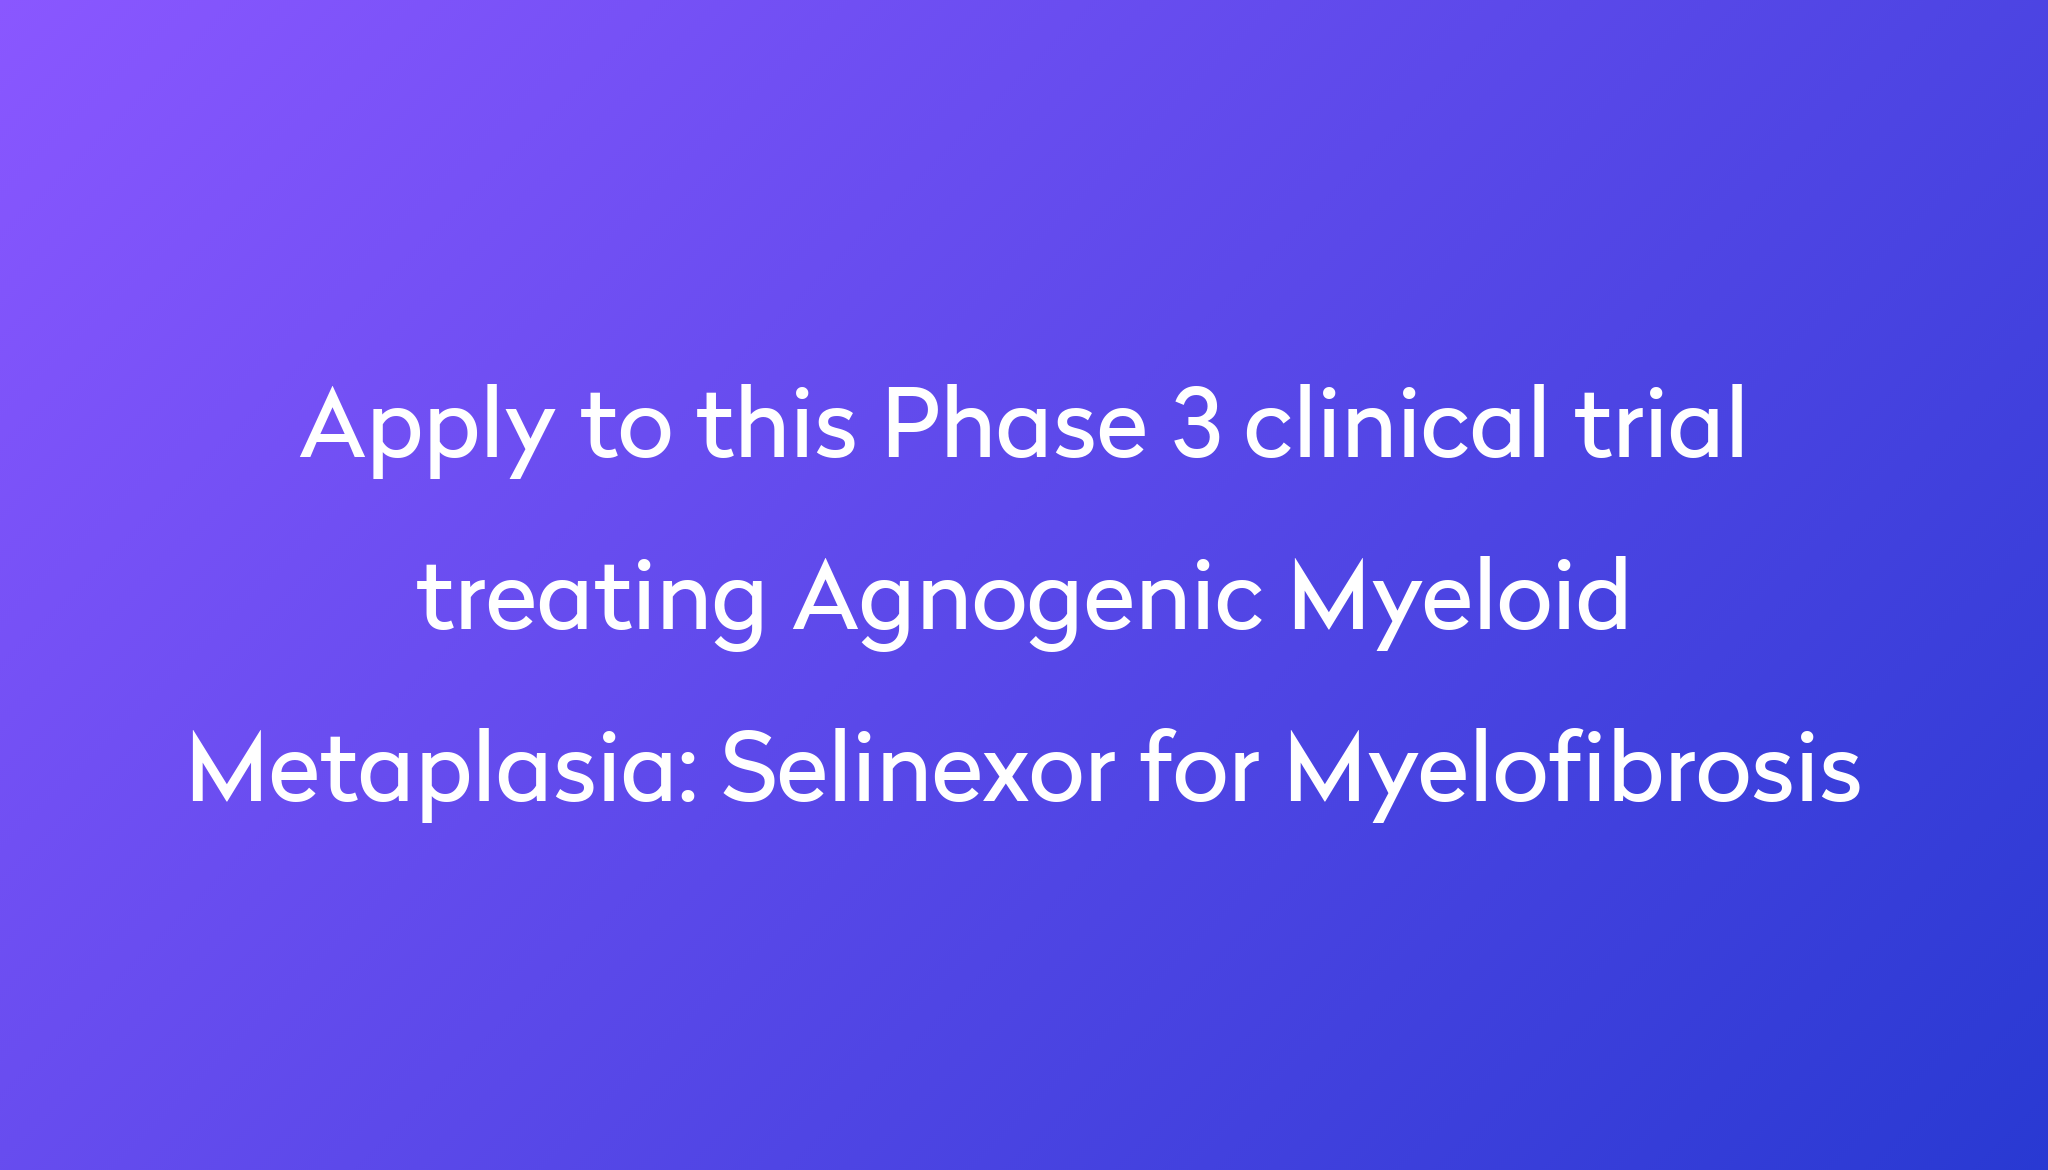 selinexor-for-myelofibrosis-clinical-trial-2023-power